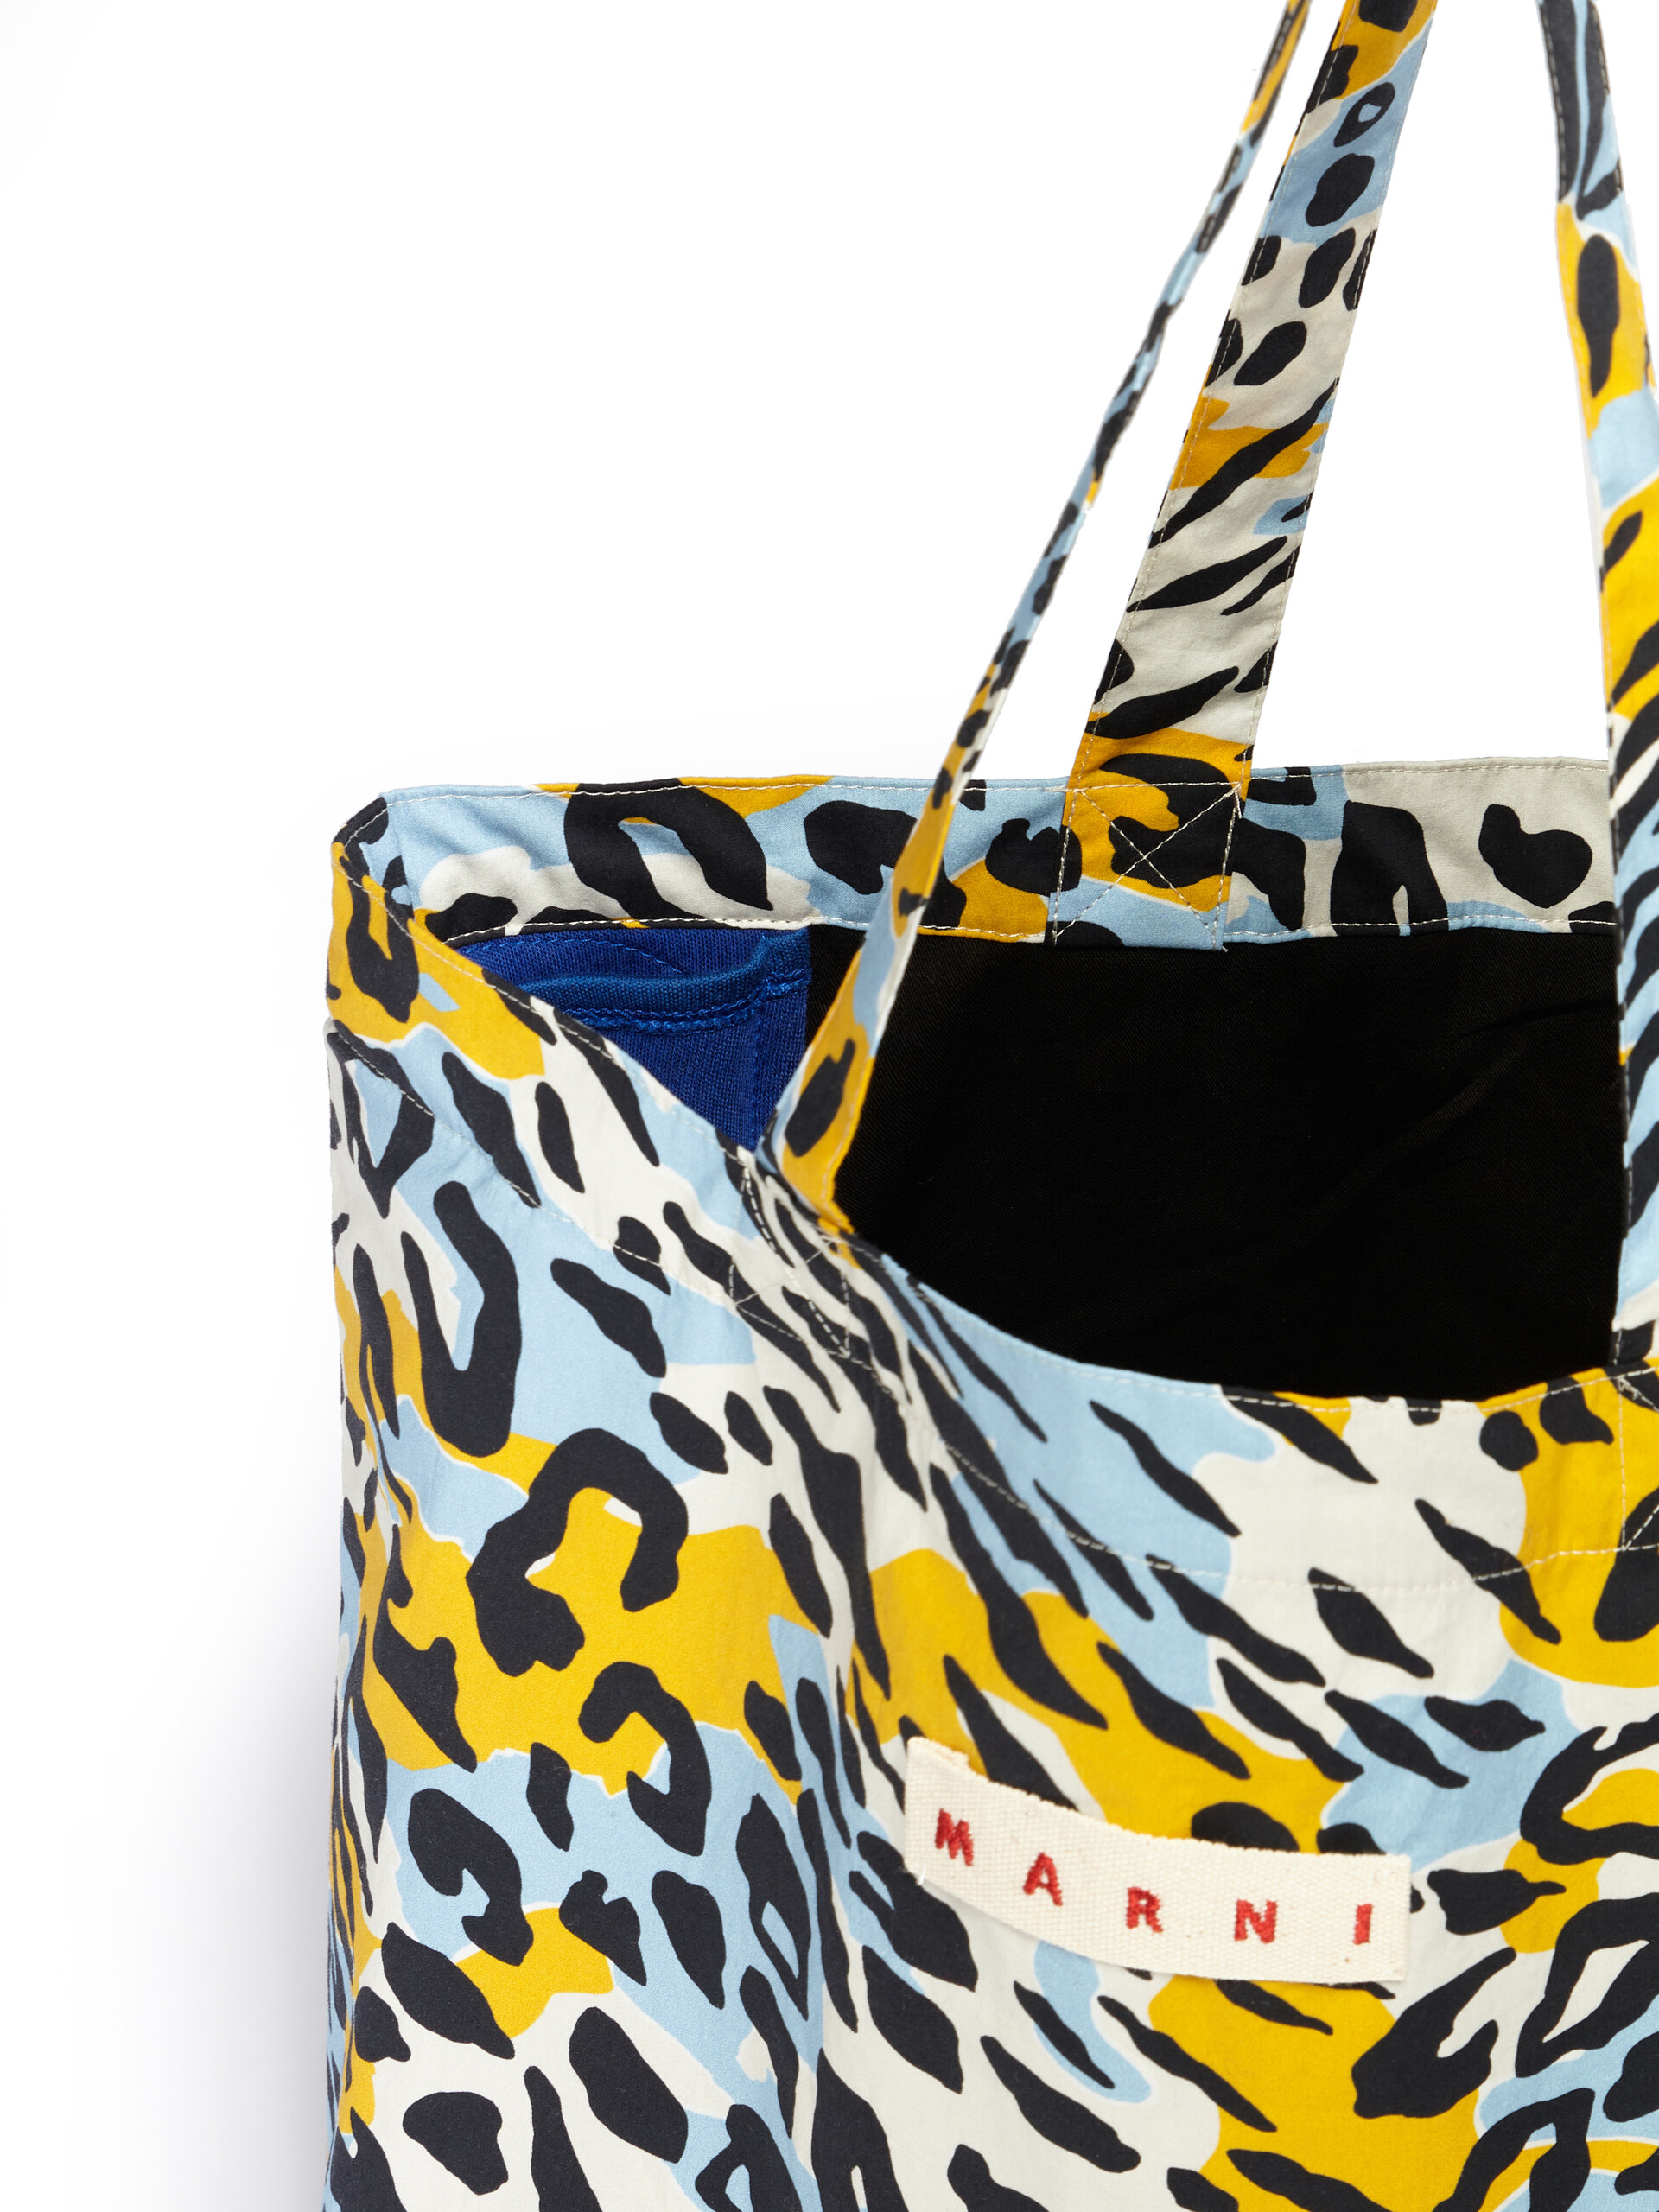 Cotton tote bag with archival black spotted print - Bags - Image 4